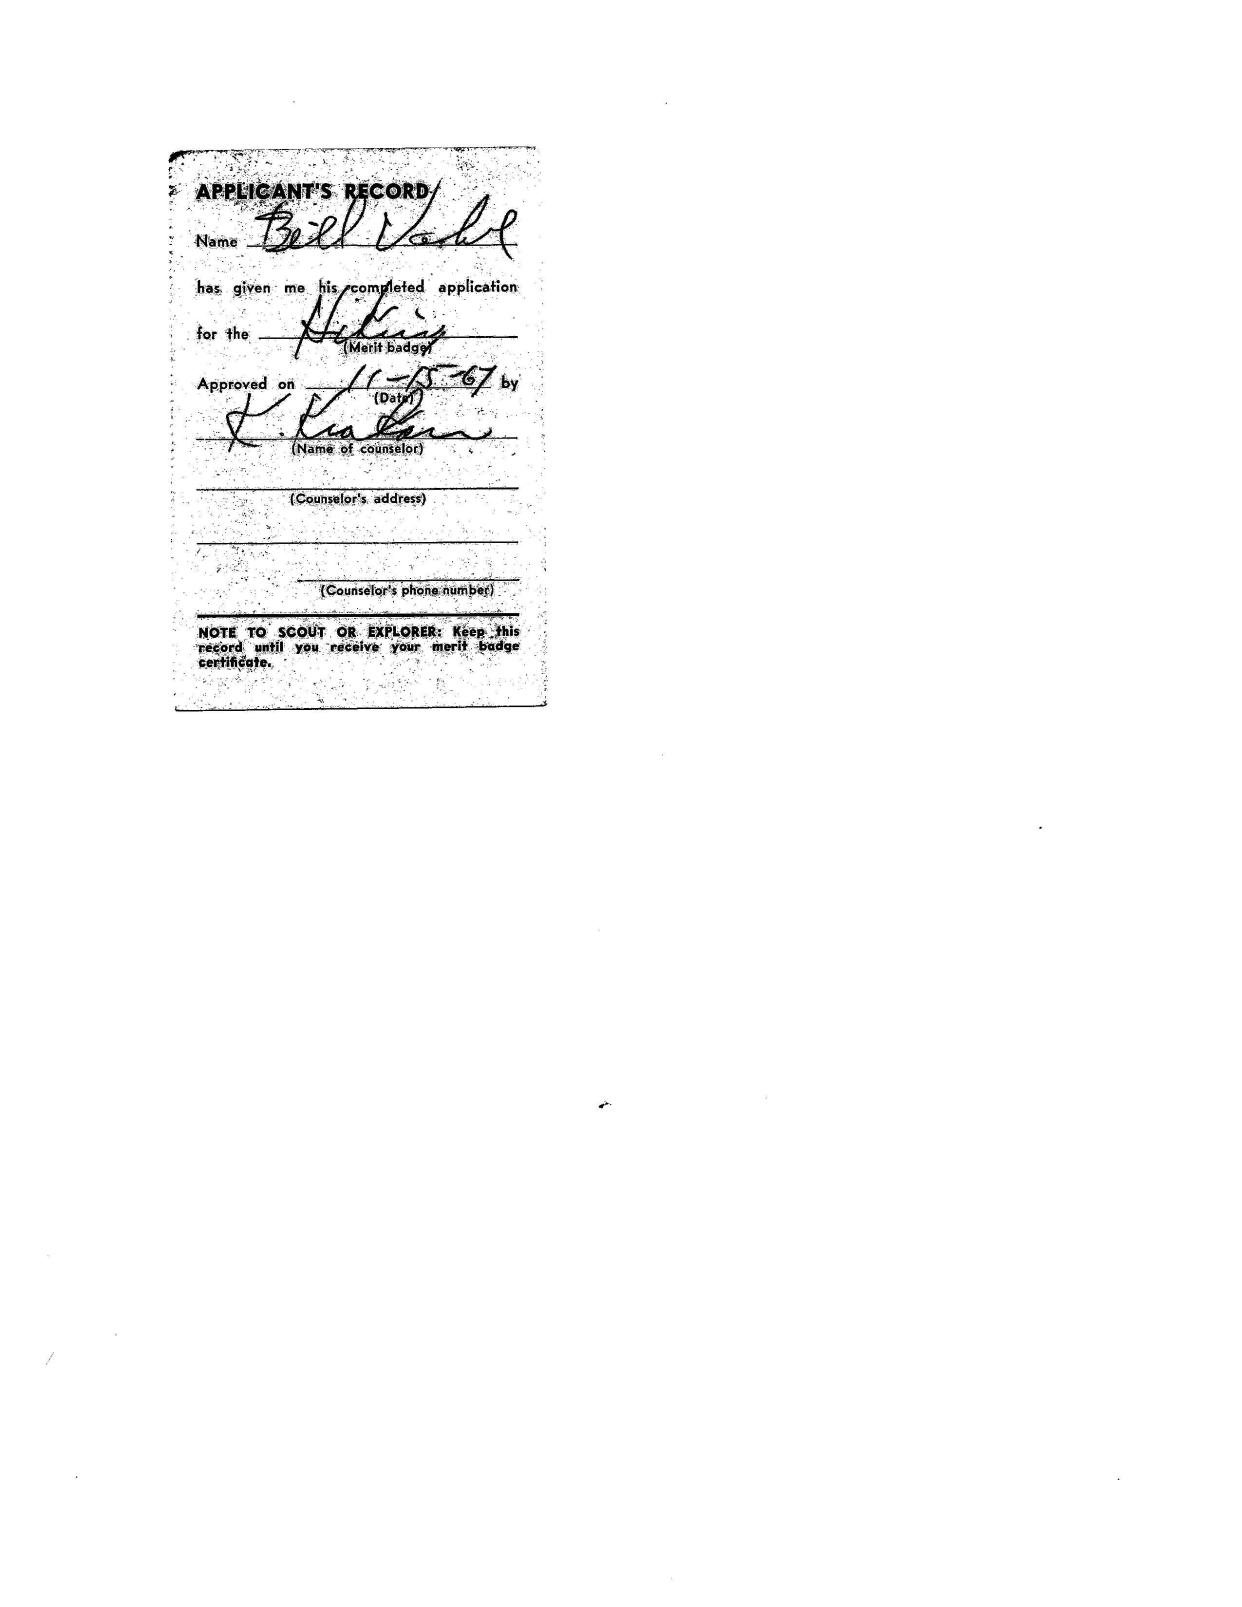 Bill Vahl's hiking merit application was signed in 1967 by Kenneth Krakow, the Scout leader he says sexually abused him.